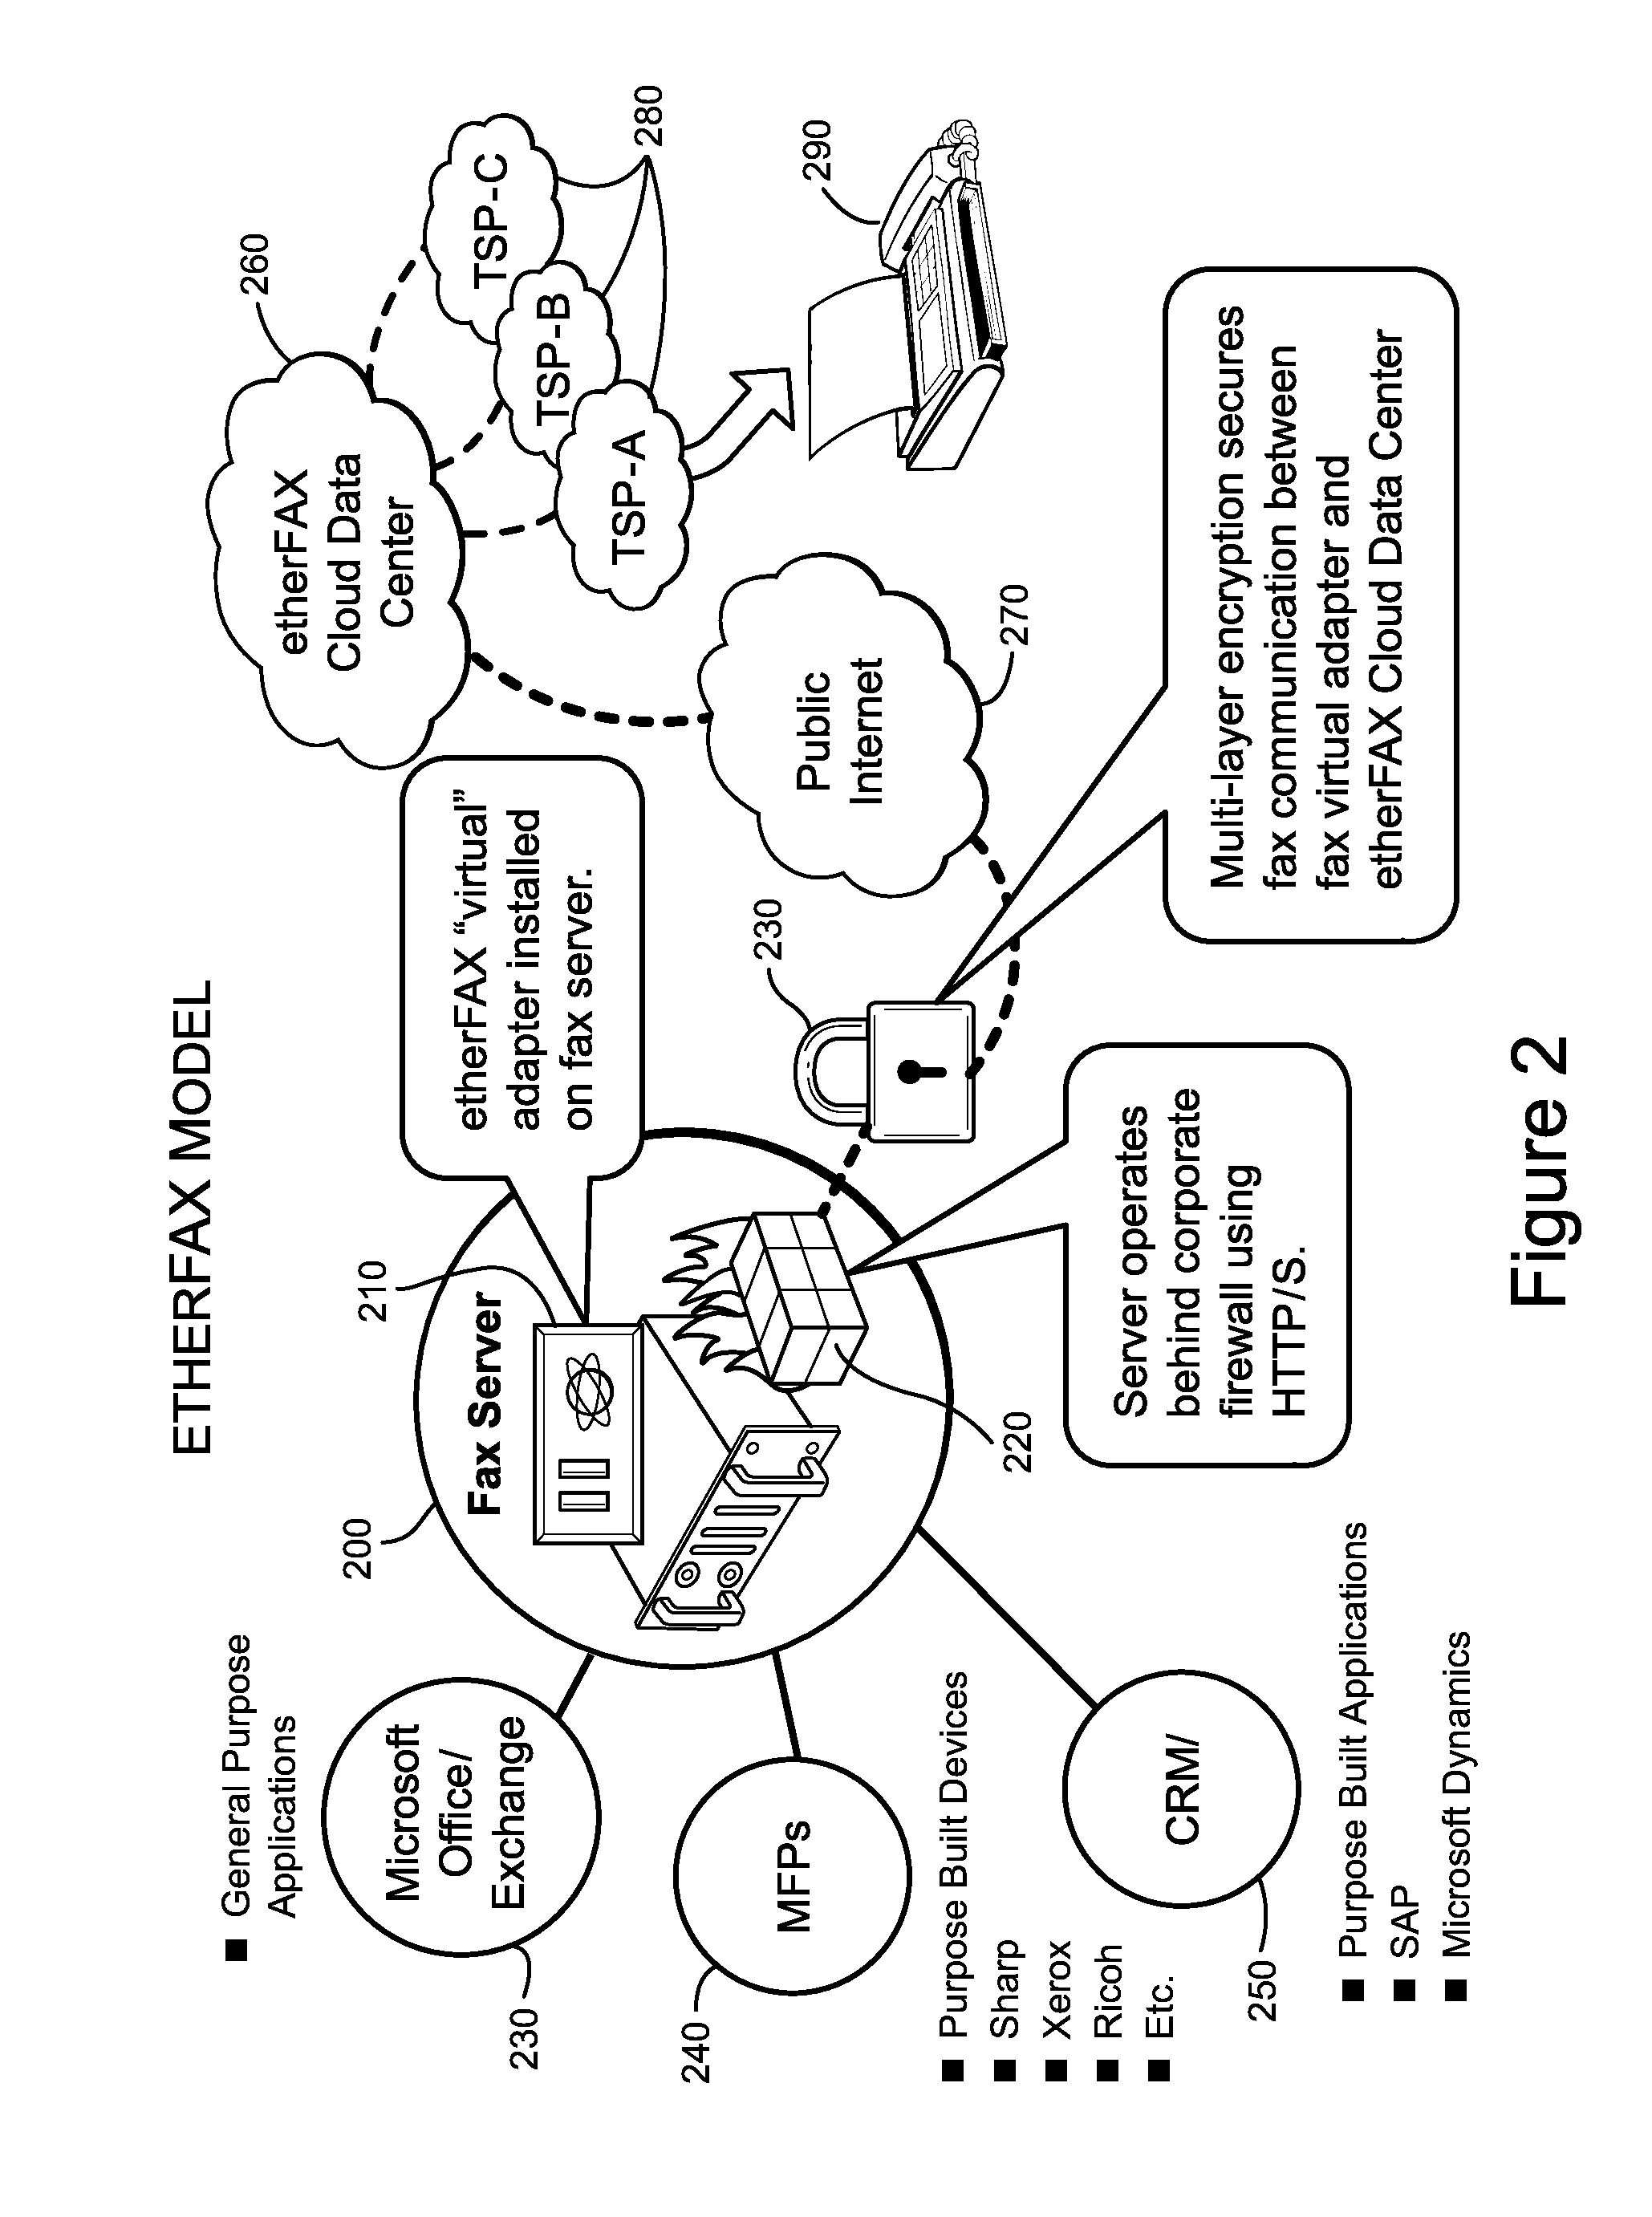 System and method of remote fax interconnect technology